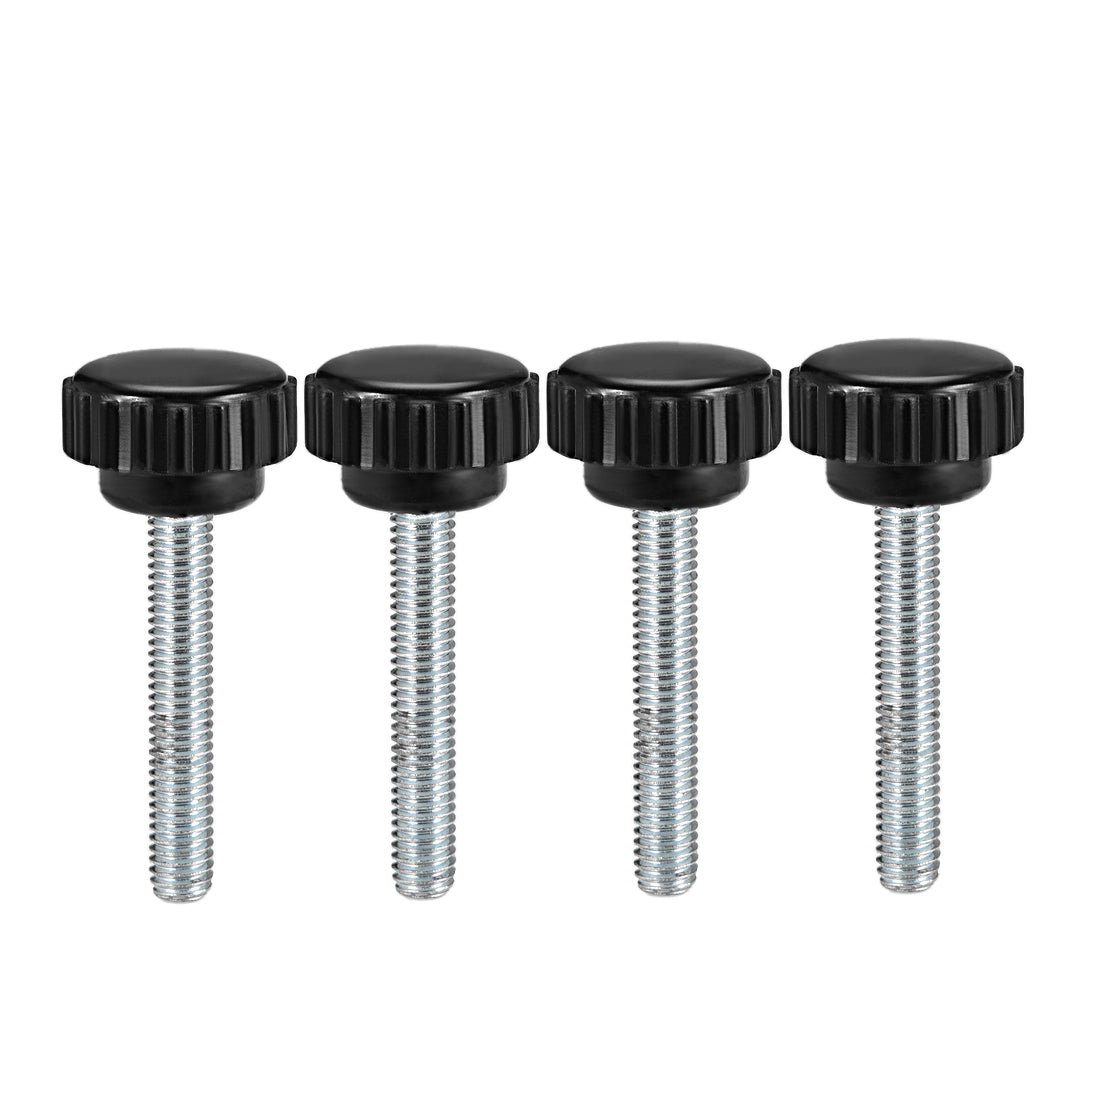 uxcell Uxcell Male Thread Knurled Clamping Knob Grip Thumb Screw on Type Round Head 4 Pack